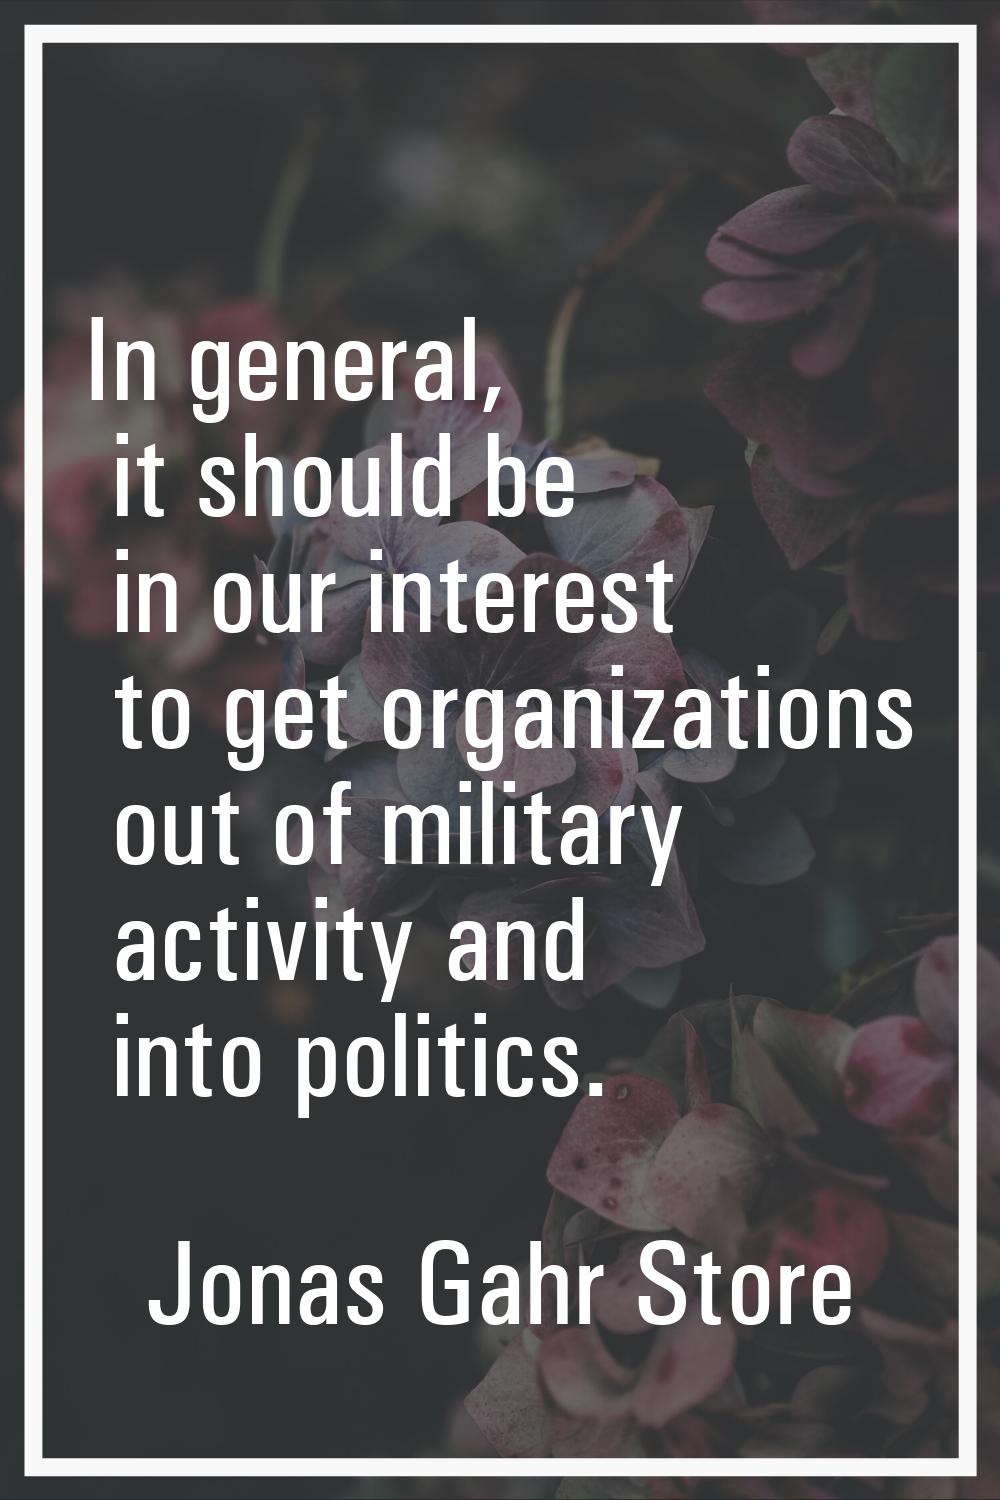 In general, it should be in our interest to get organizations out of military activity and into pol